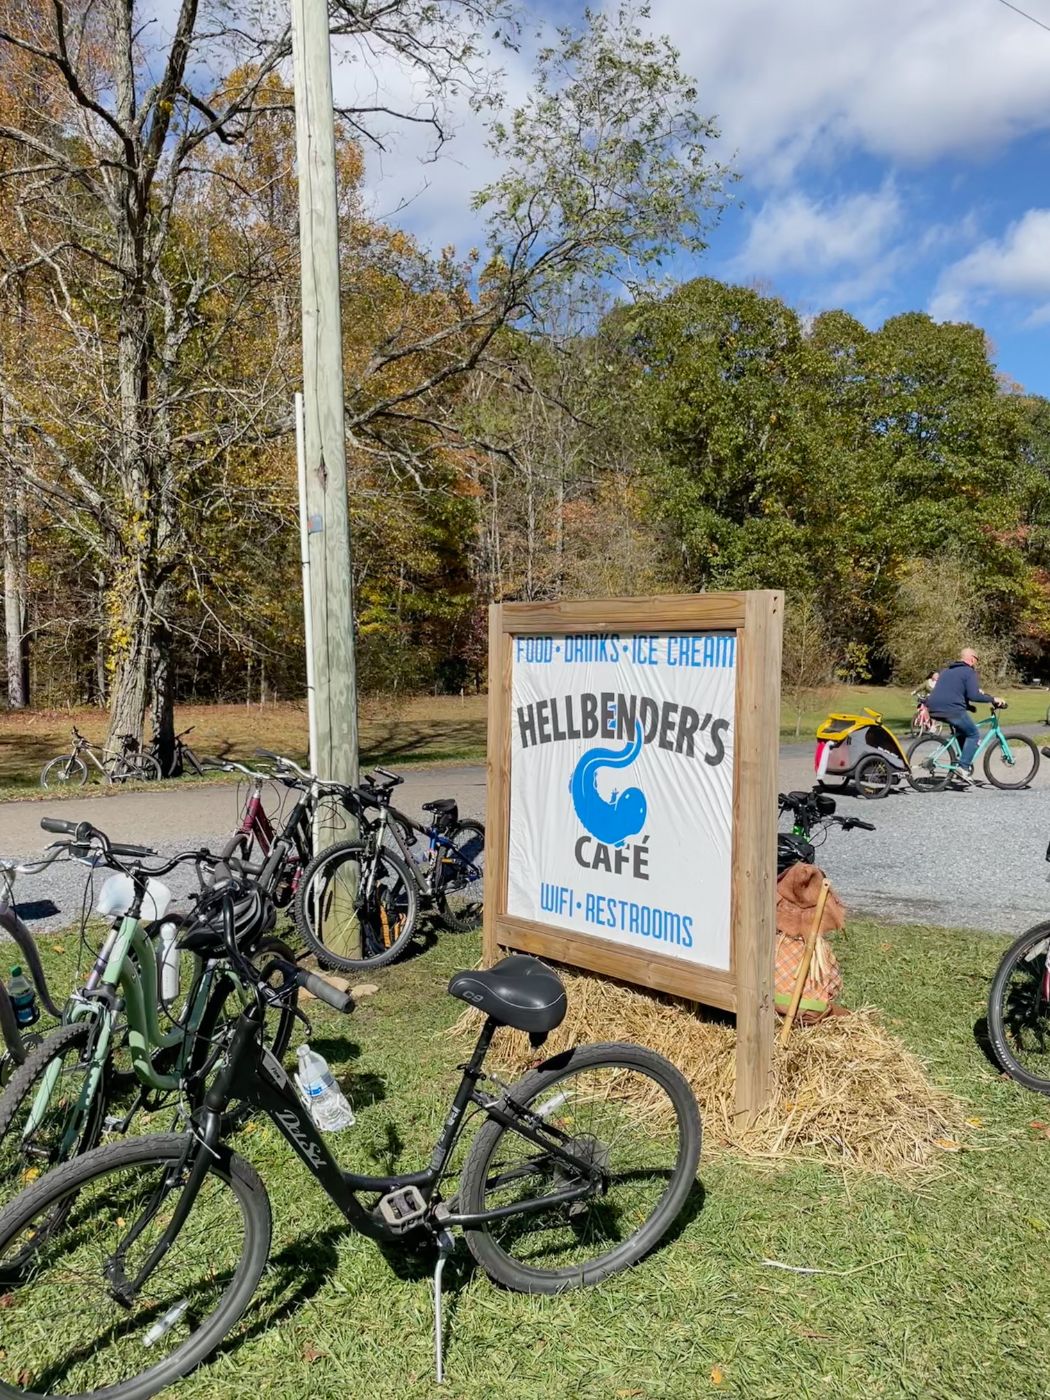 Hellbender's Cafe on the VCT